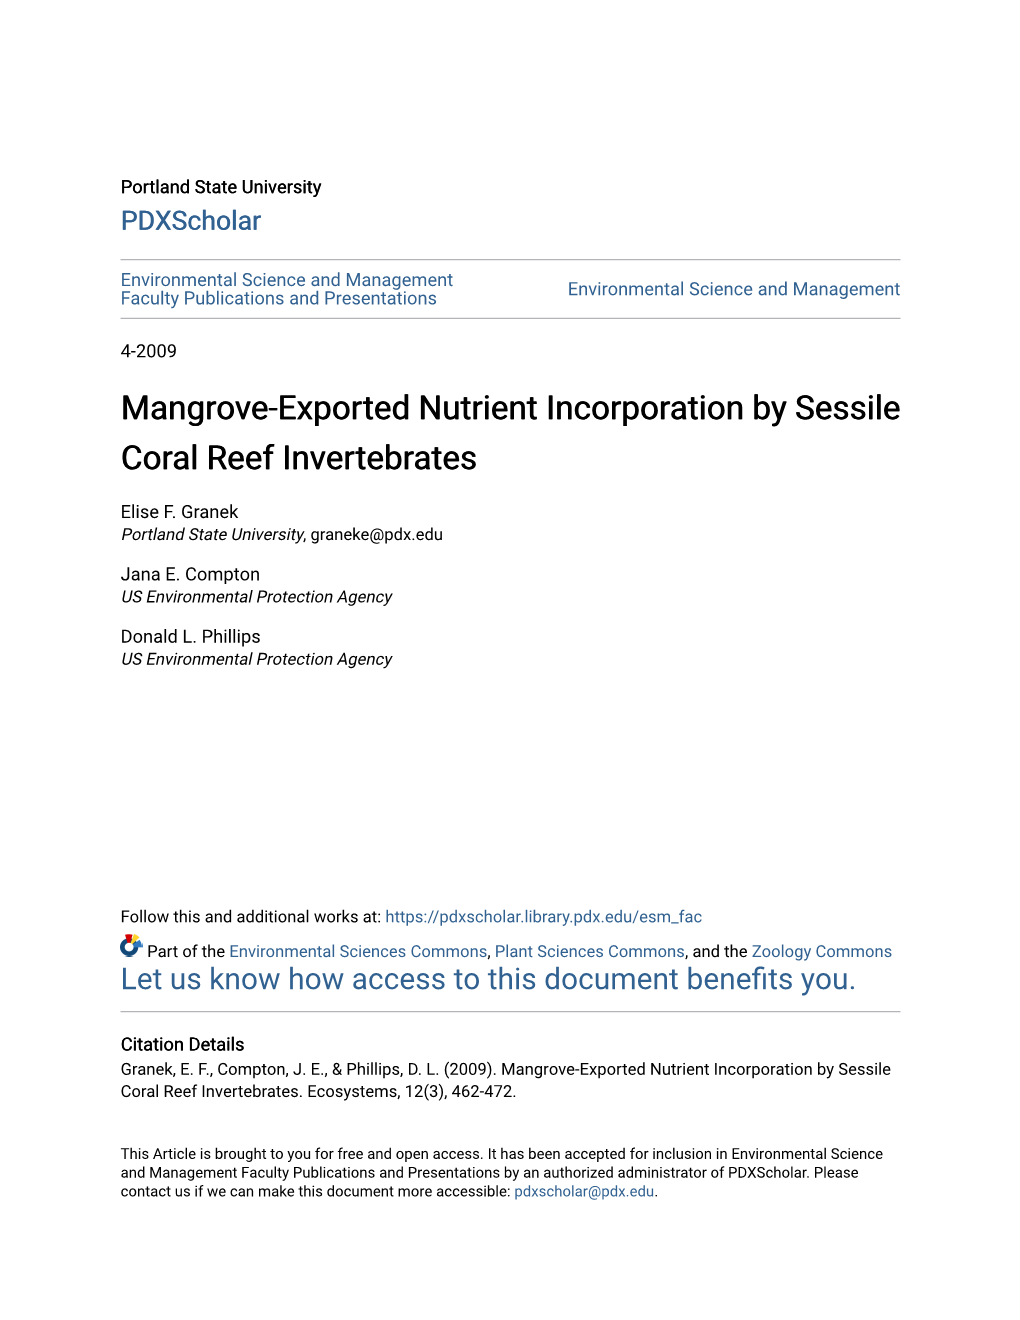 Mangrove-Exported Nutrient Incorporation by Sessile Coral Reef Invertebrates